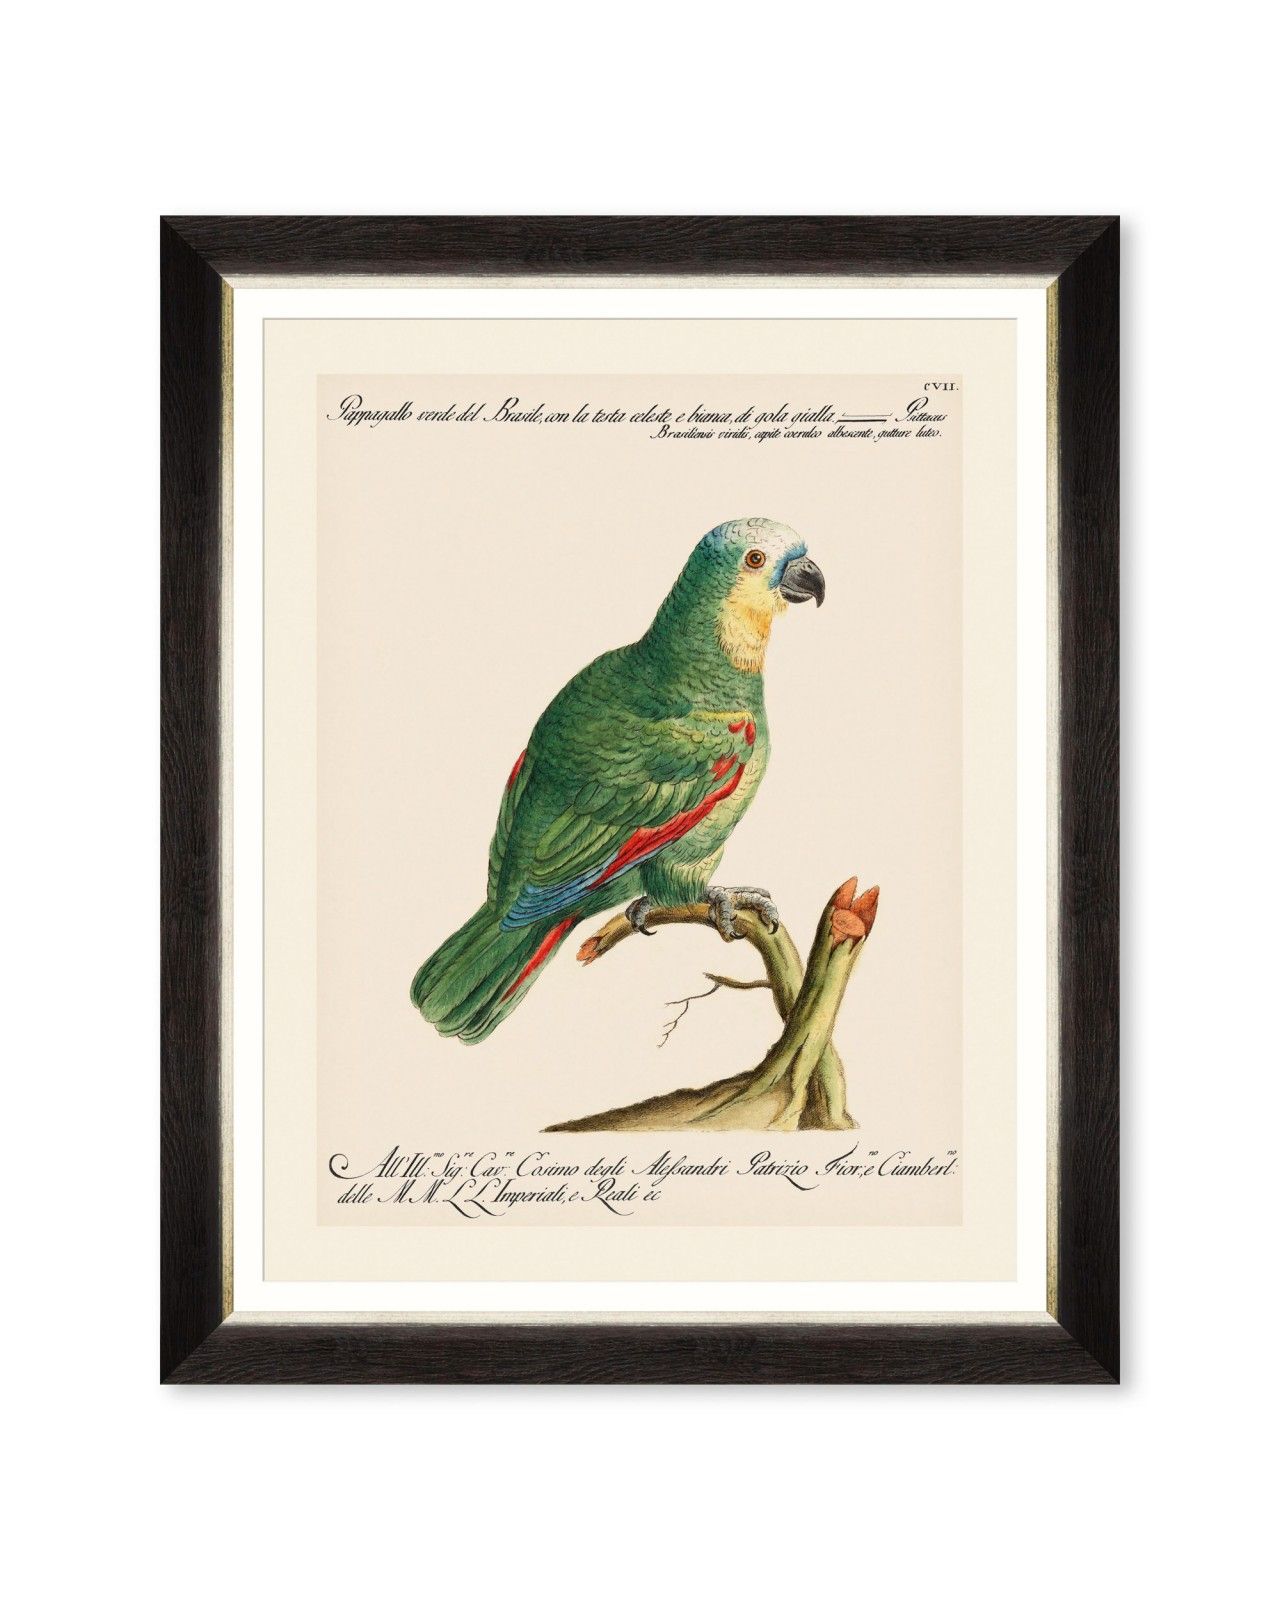 Parrots Of Brazil I Framed Art – Wall Art – Sale – Products With Regard To Most Recent Bird Macaw Wall Sculpture (View 16 of 20)